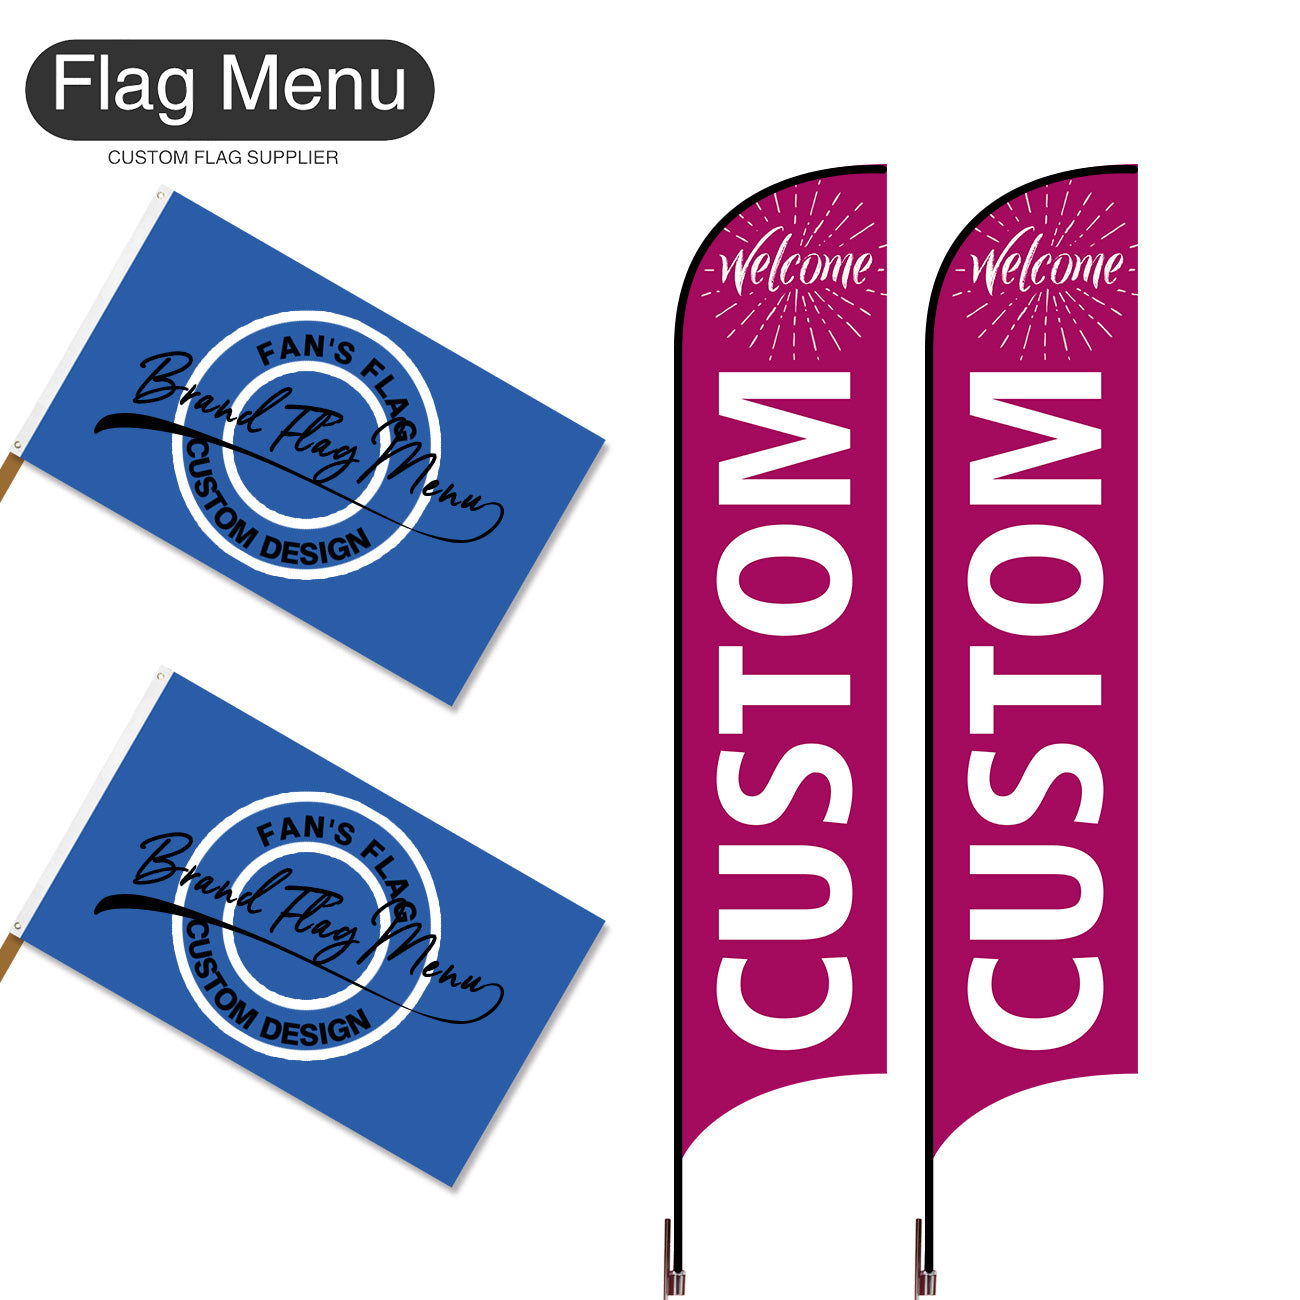 Outdoor Advertising Set - C-Wine-S - Feather Flag -Double Sided & 3'x5' Regular Flag -Single Sided-Cross & Water Bag-Flag Menu